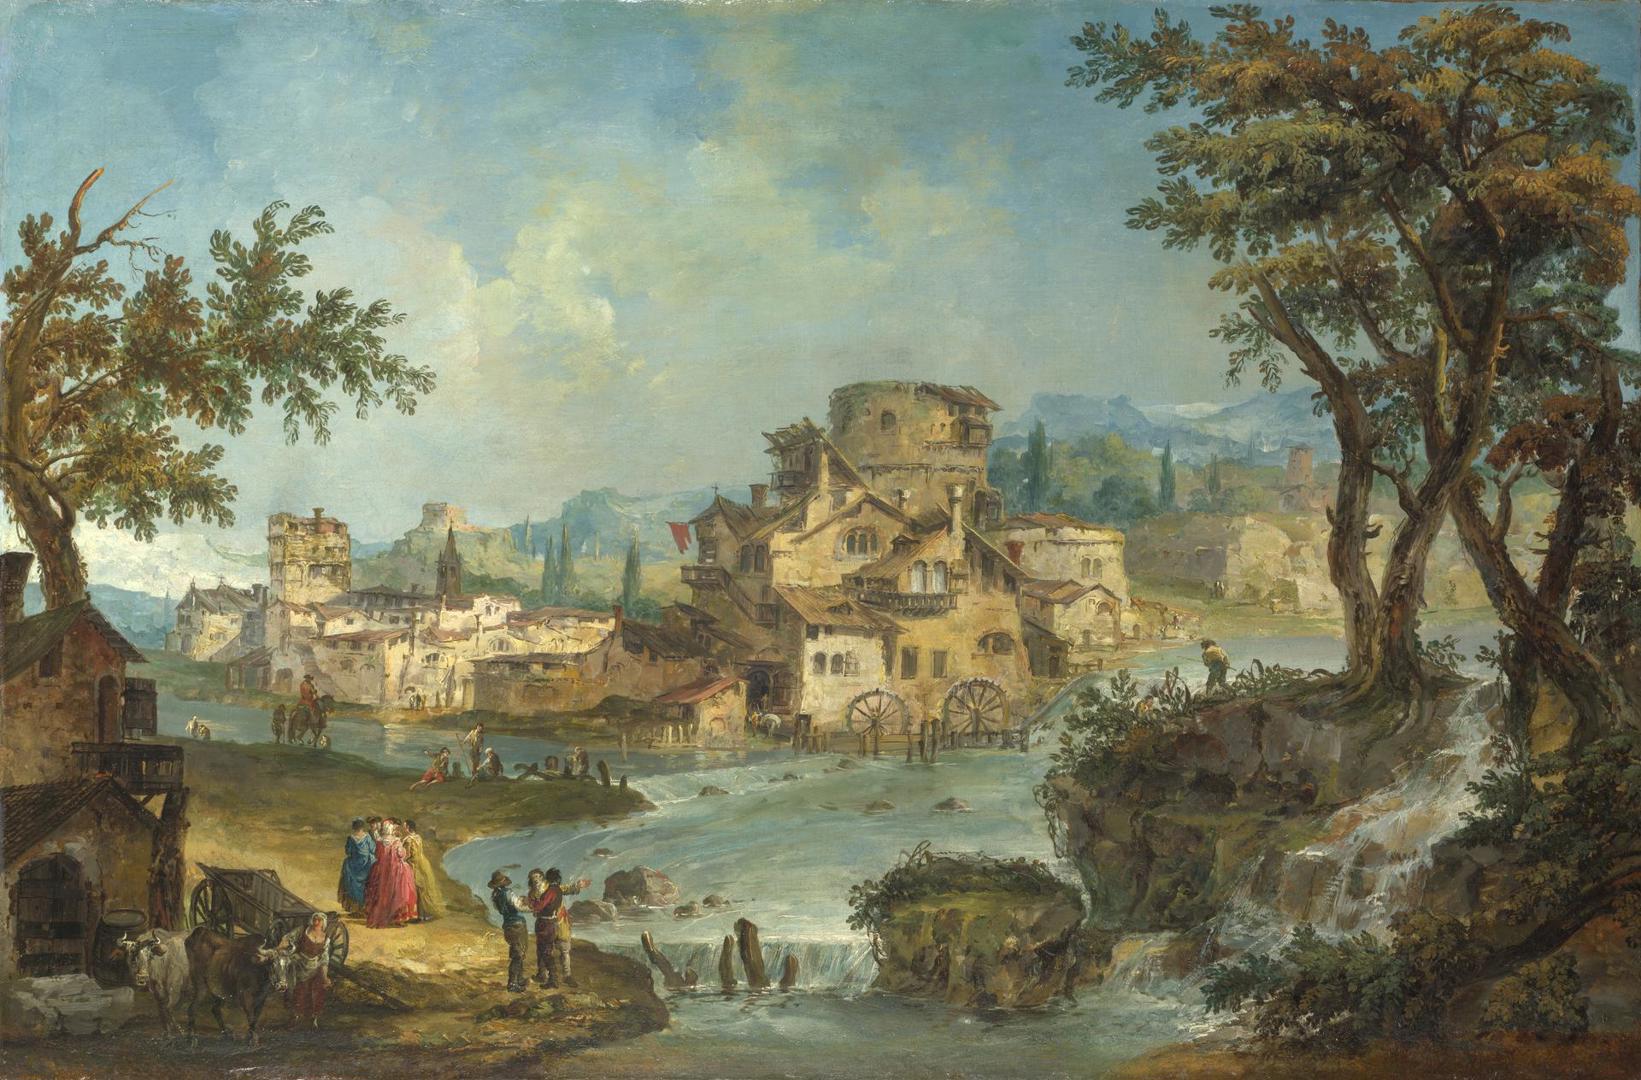 Buildings and Figures near a River with Rapids by Michele Marieschi